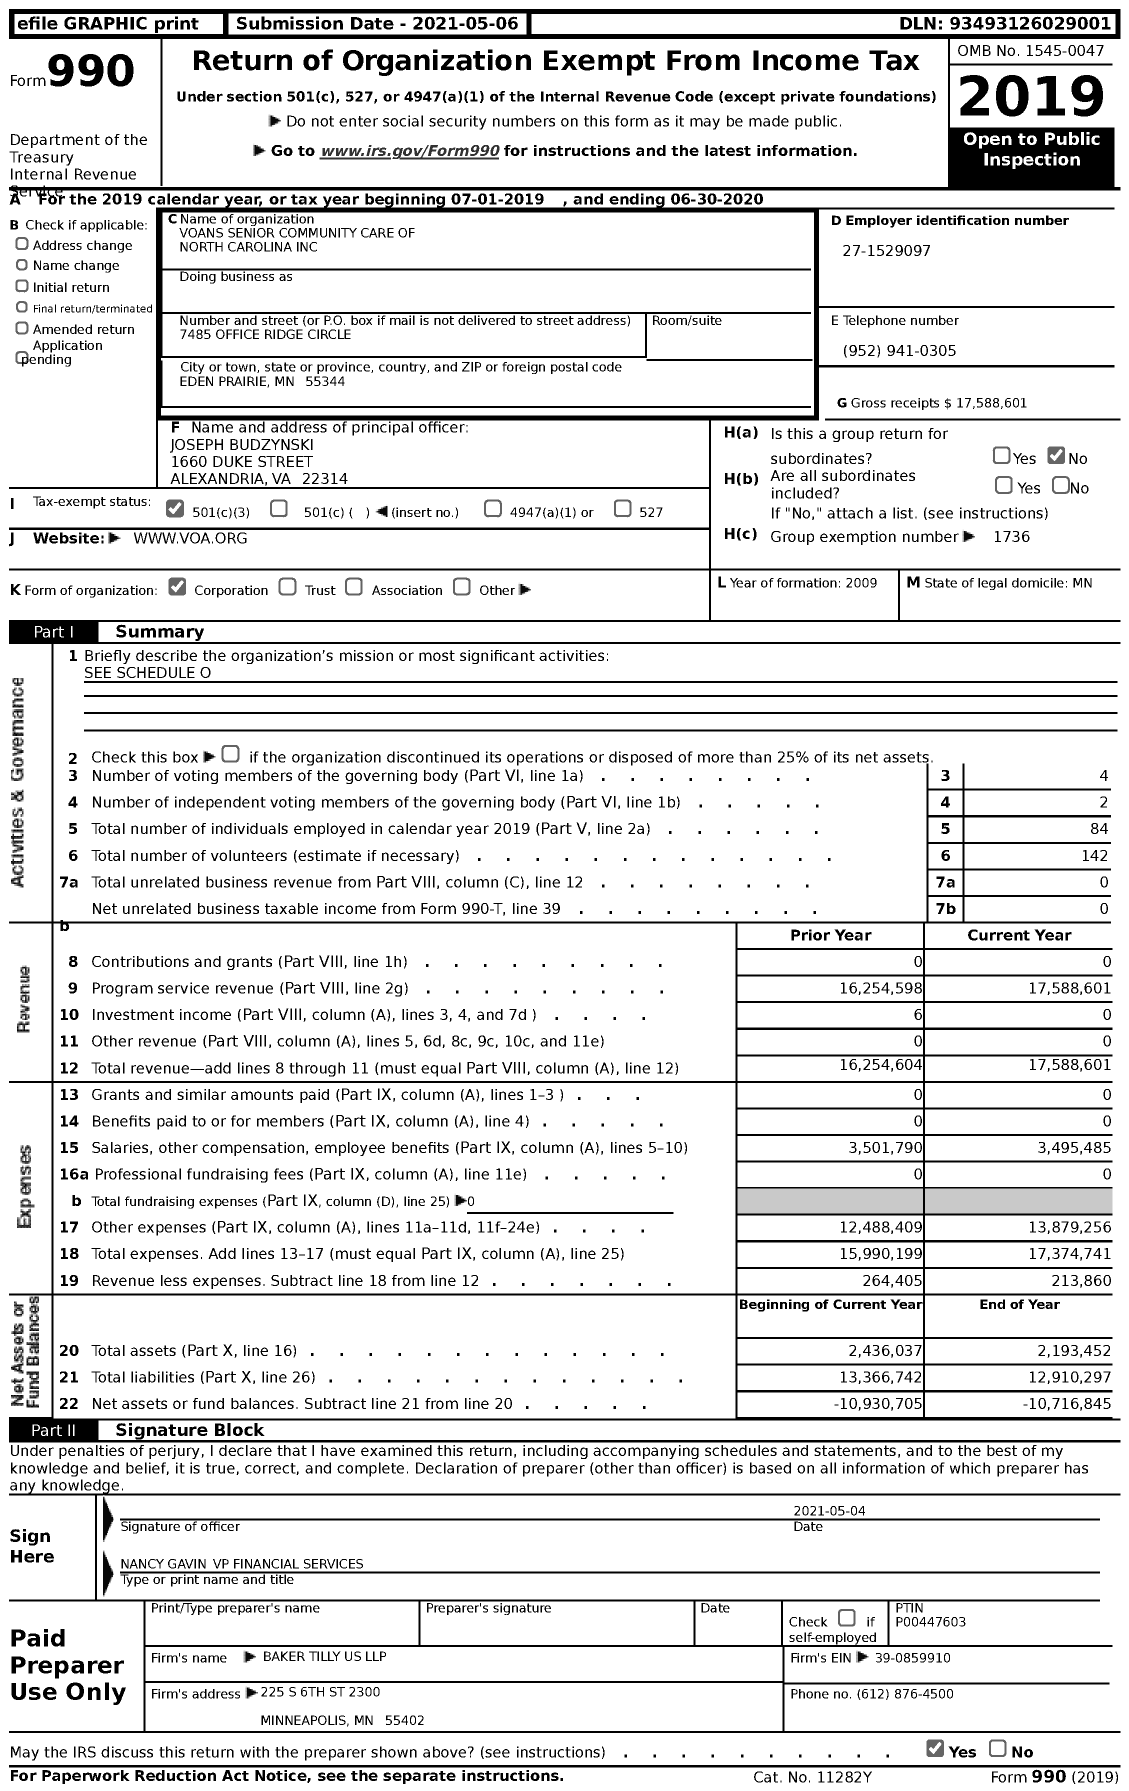 Image of first page of 2019 Form 990 for Volunteers of America - VOANS Senior Community Care of North